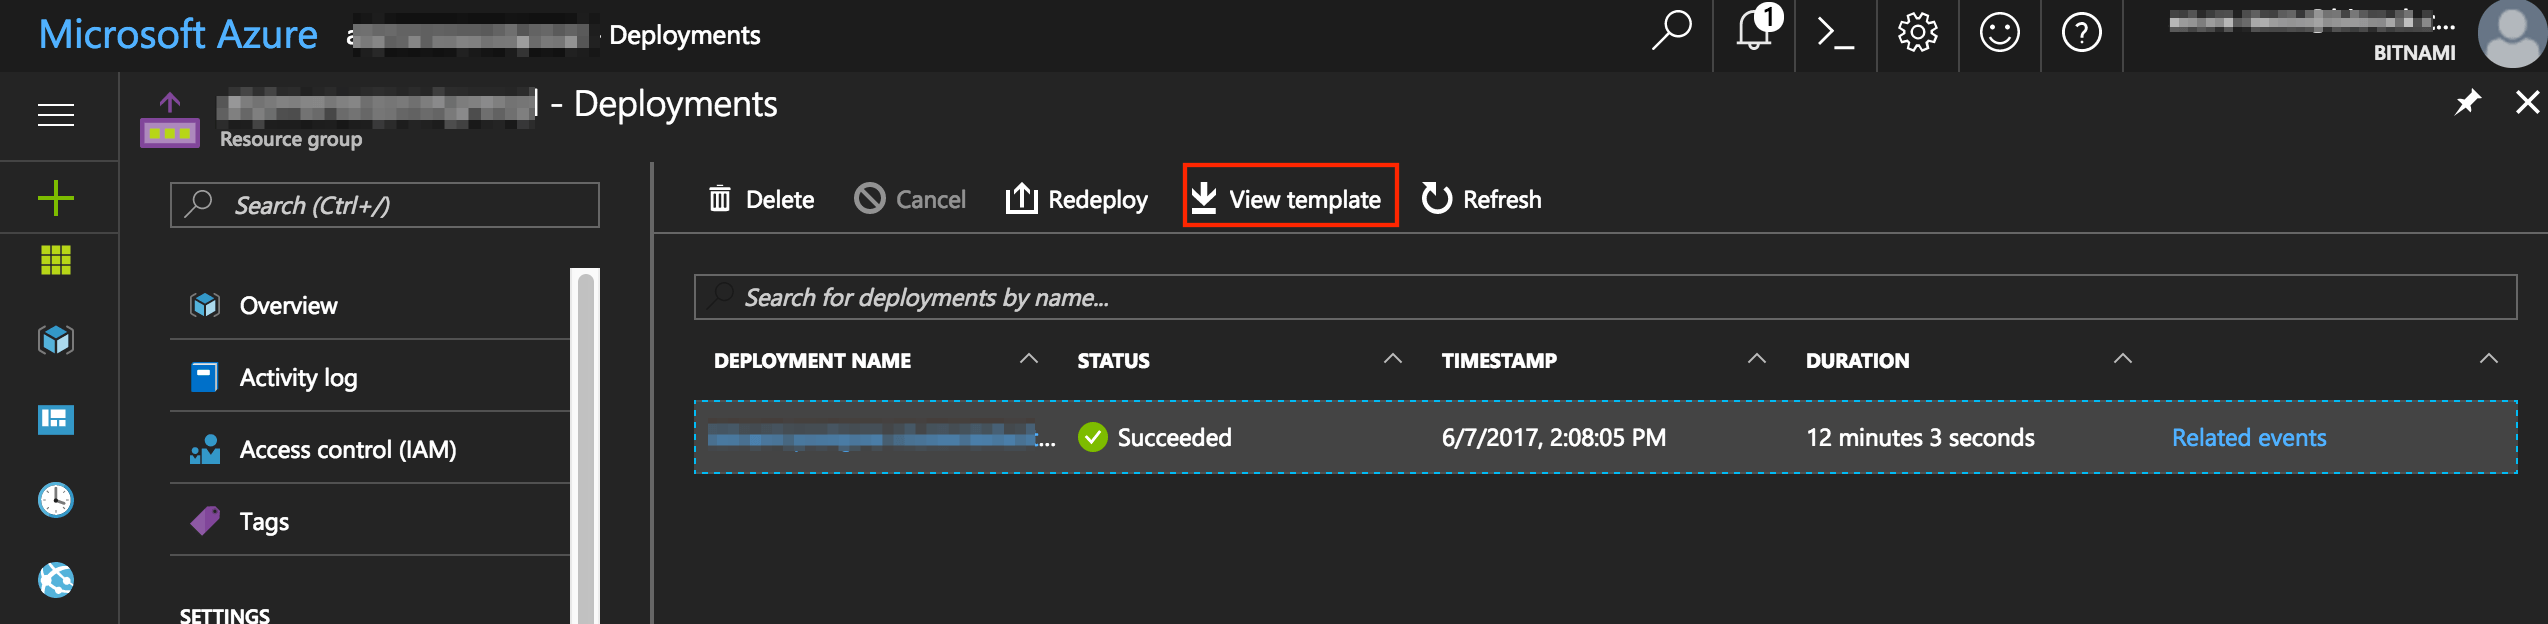 Download the deployment template